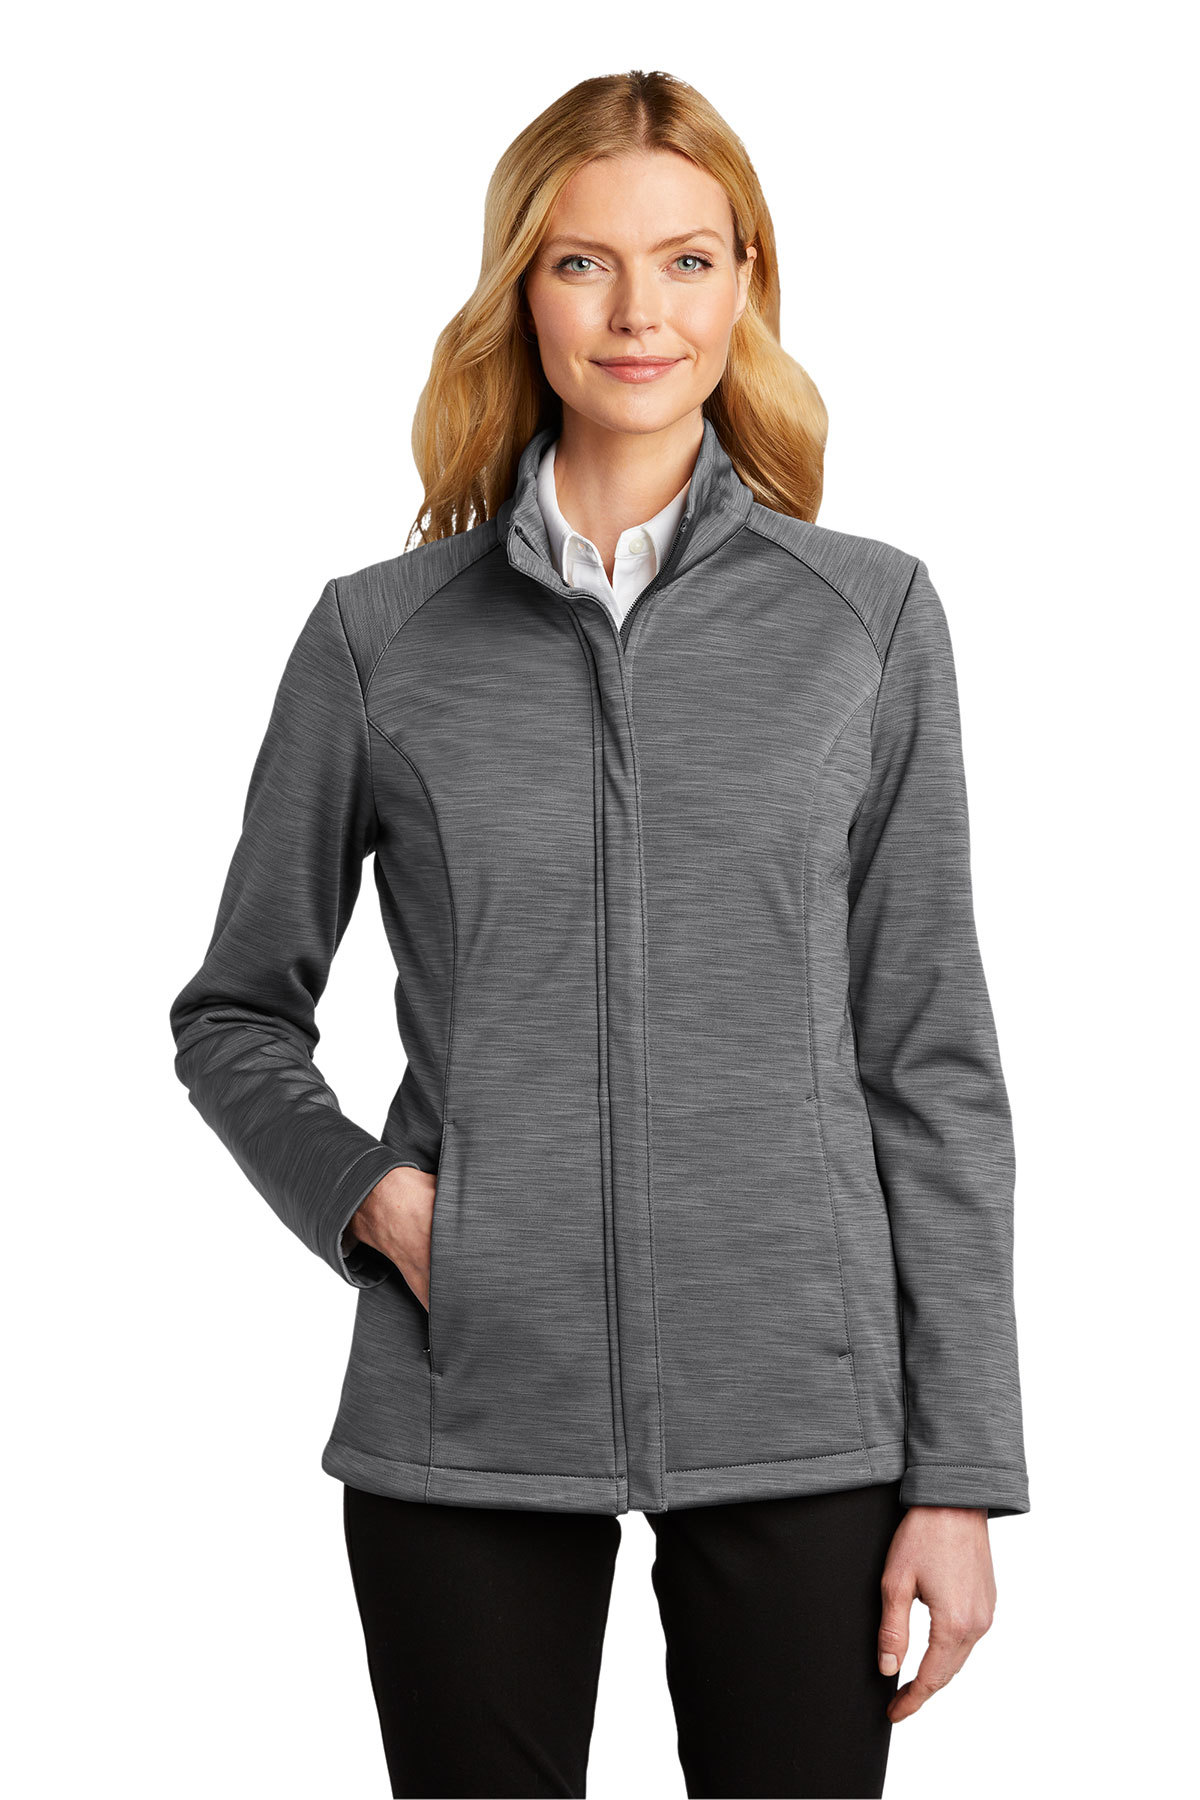 Port Authority Ladies Stream Soft Shell Jacket | Product | Company Casuals